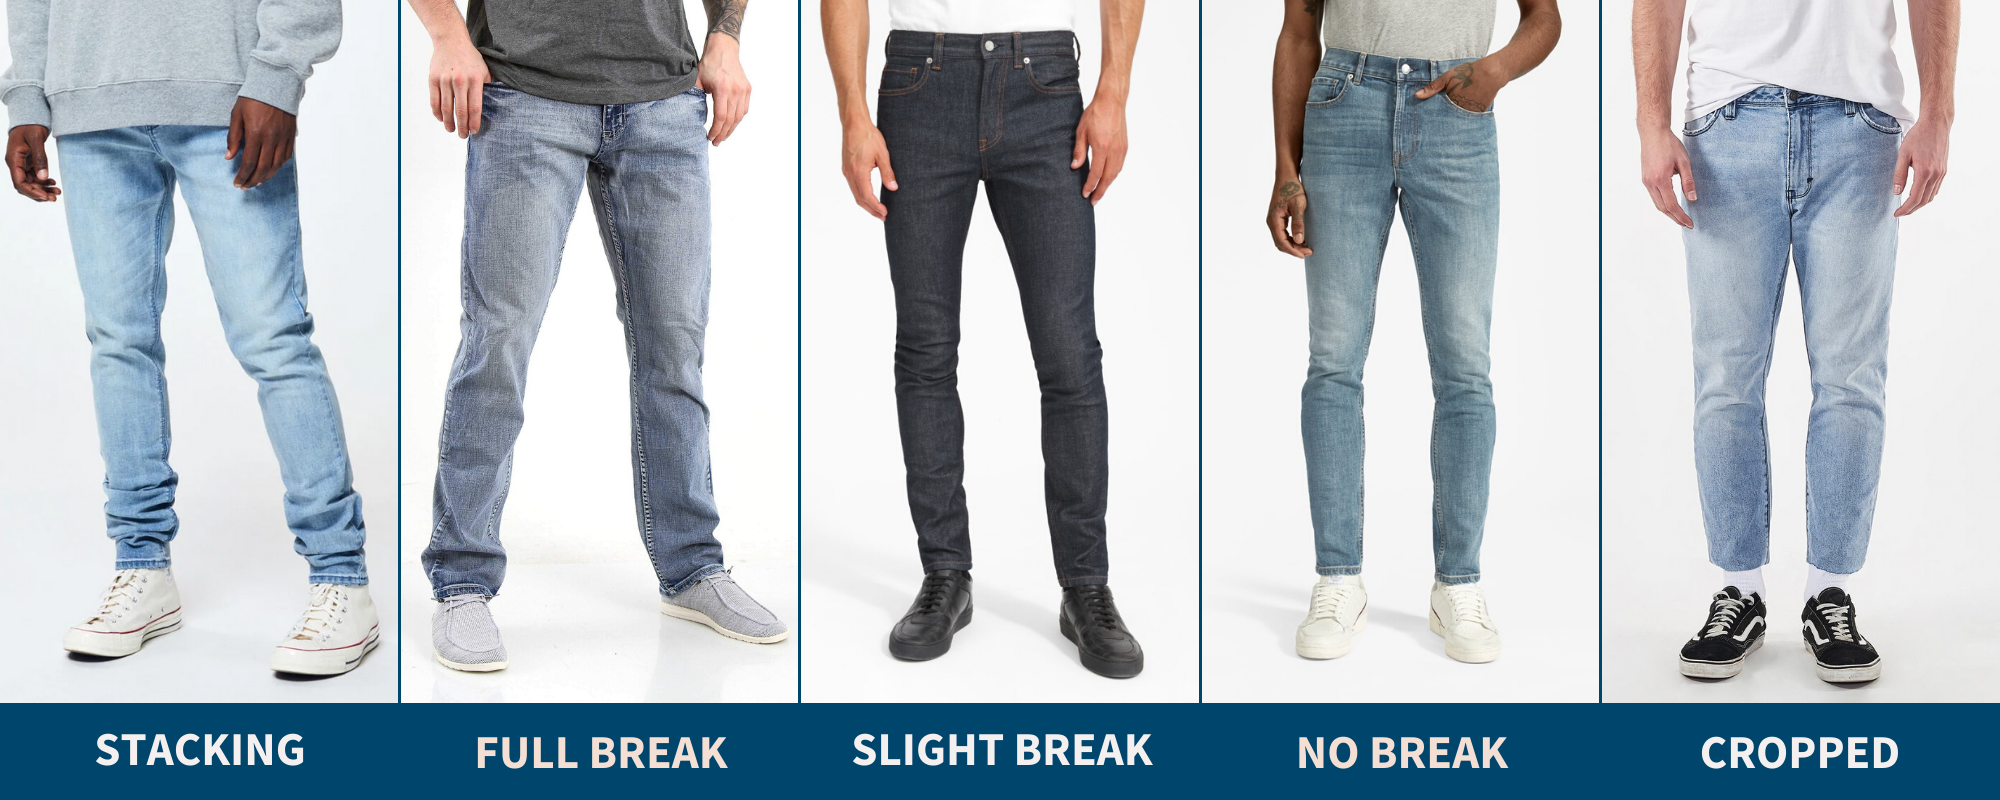 best jeans for guys with no bum